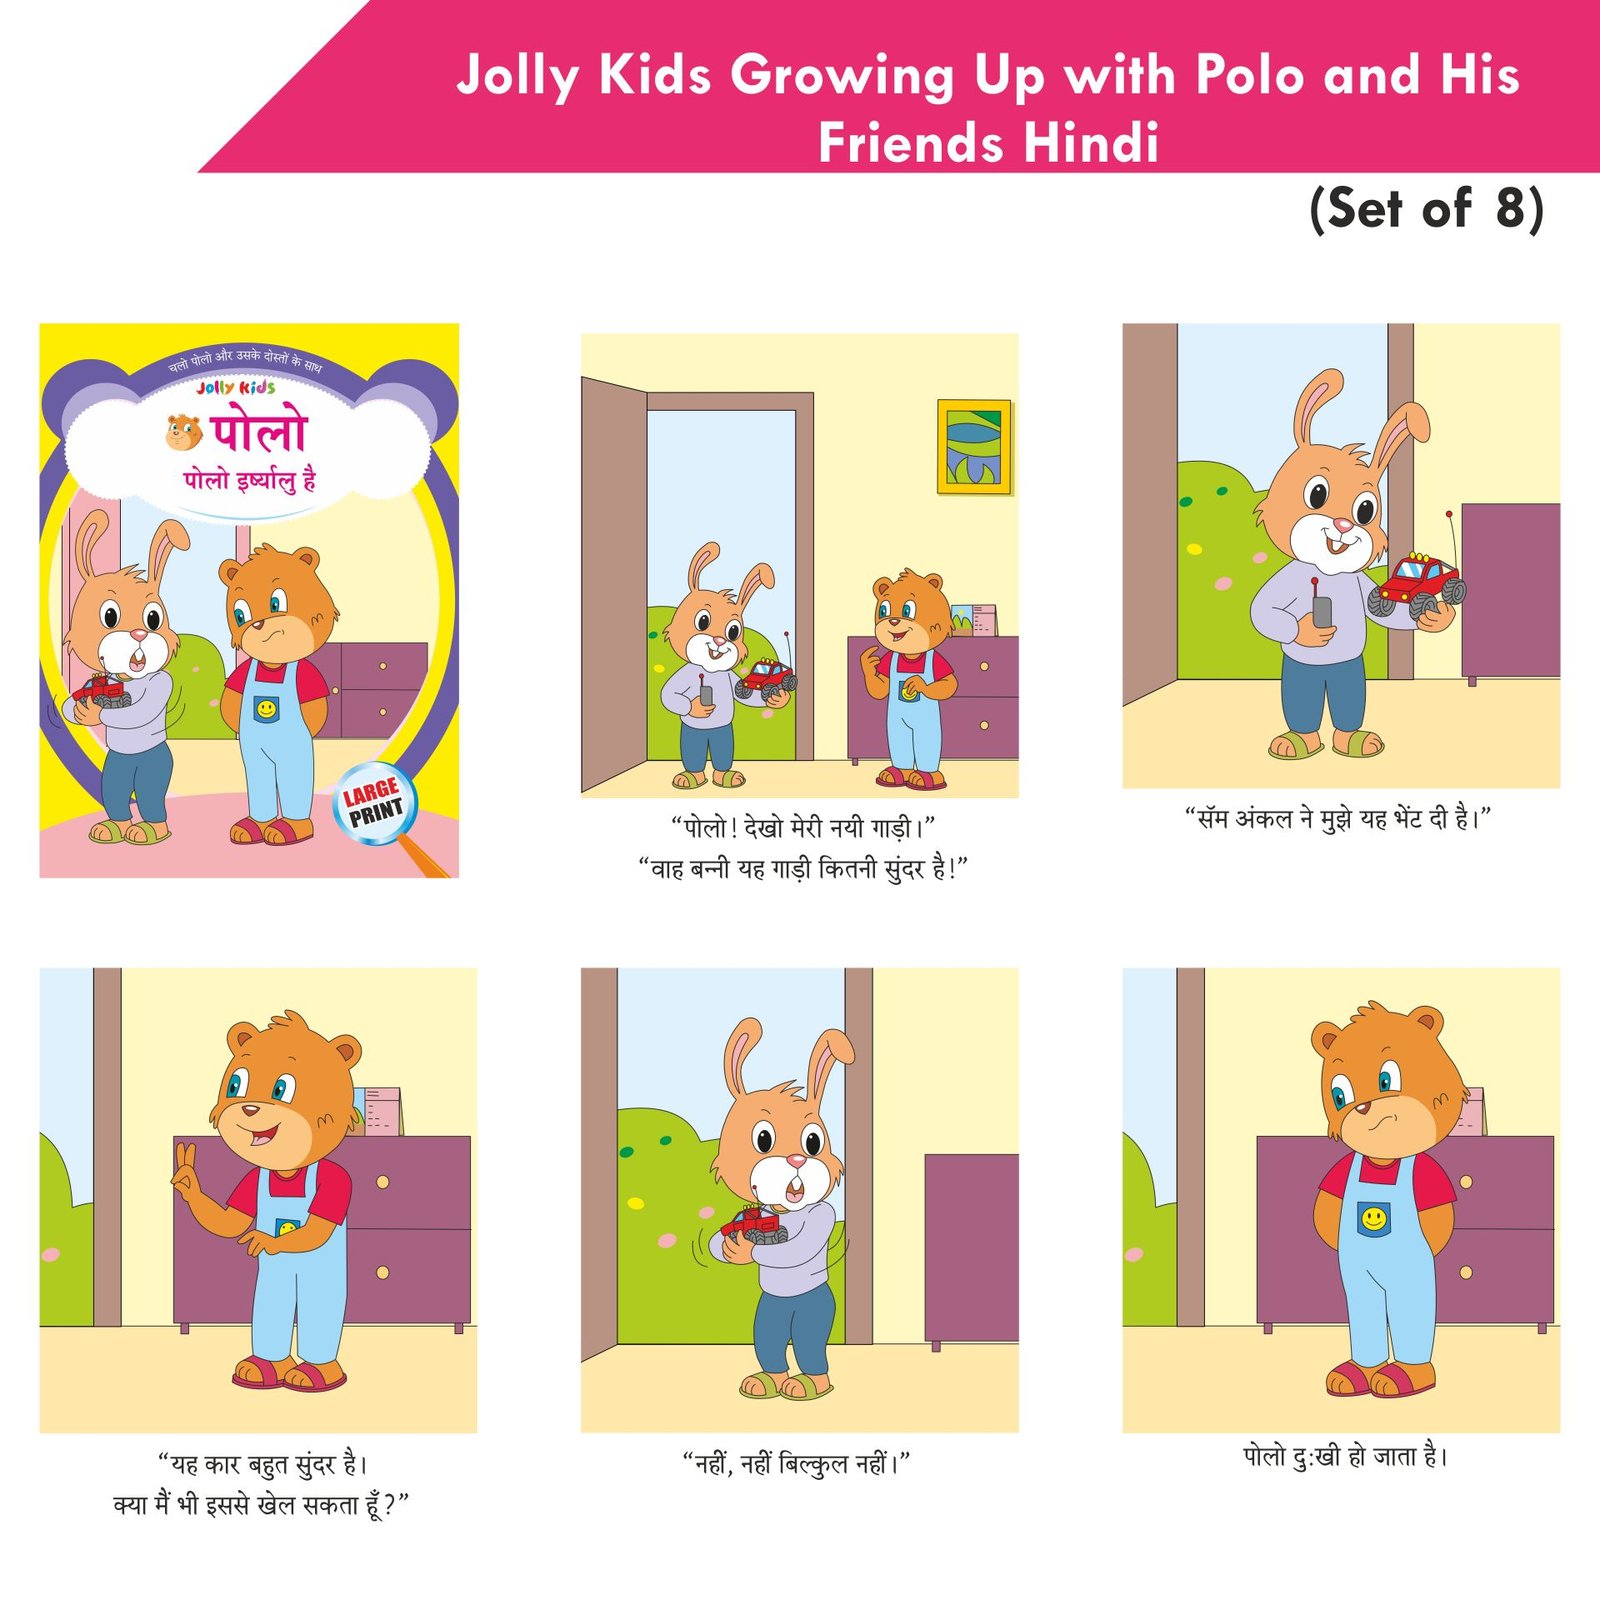 Jolly Kids Growing Up with Polo and His Friends Hindi Set of 8 10